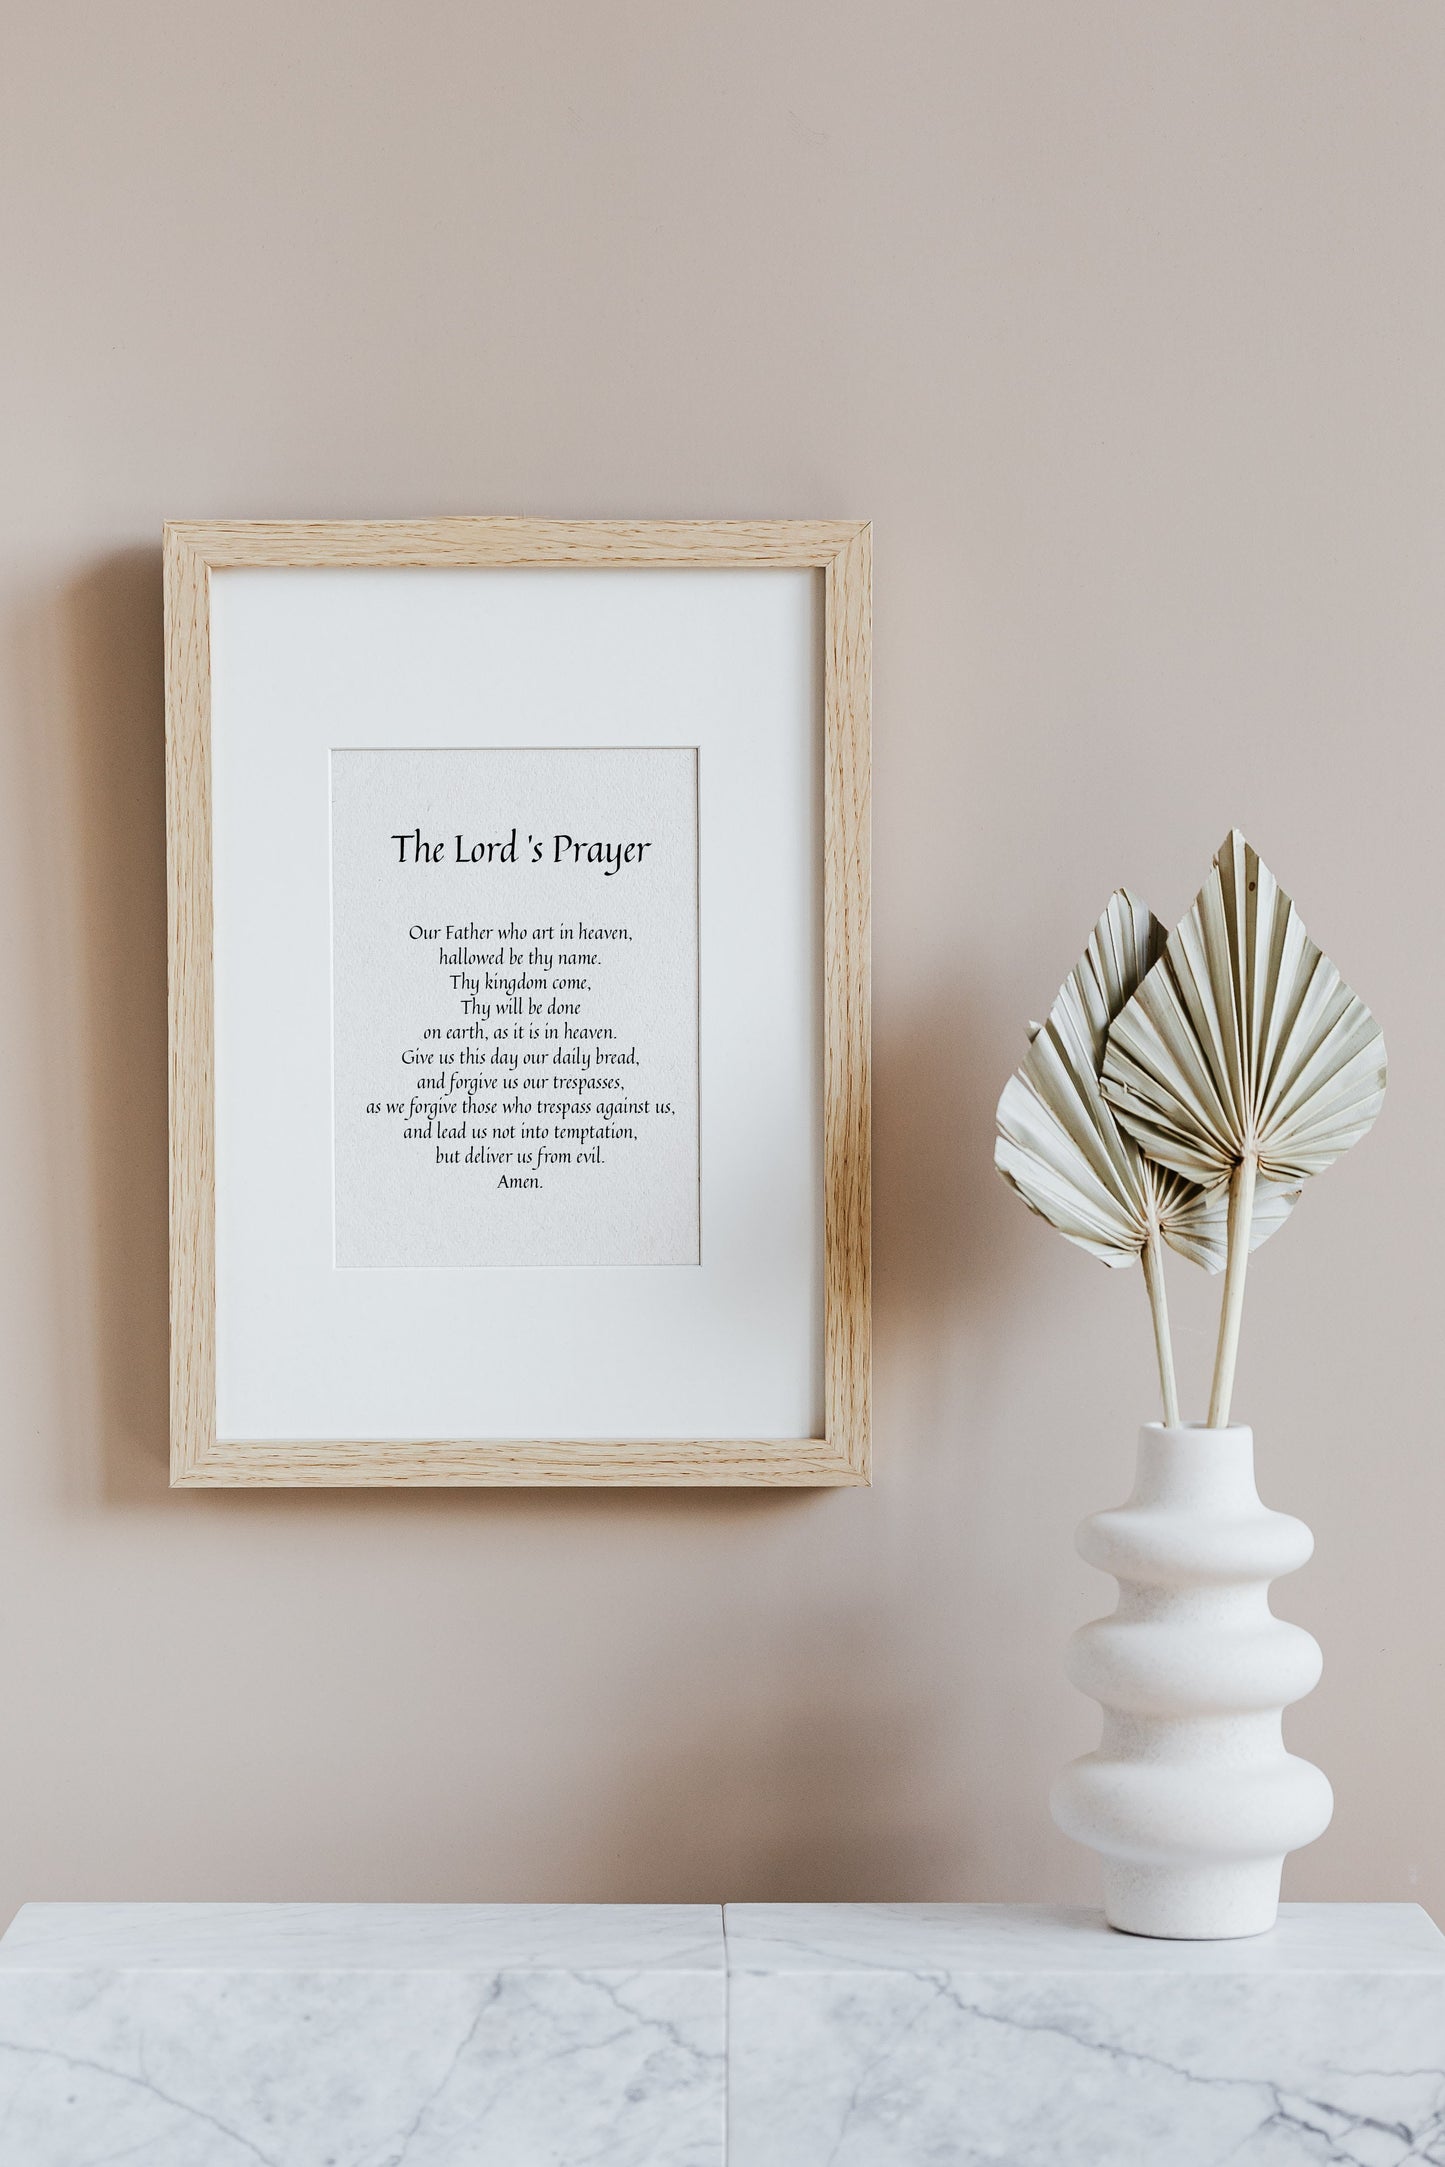 The Our Father Prayer - The Lord's Prayer Framed - Religious gift - Prayer poster - Christian Wall Art